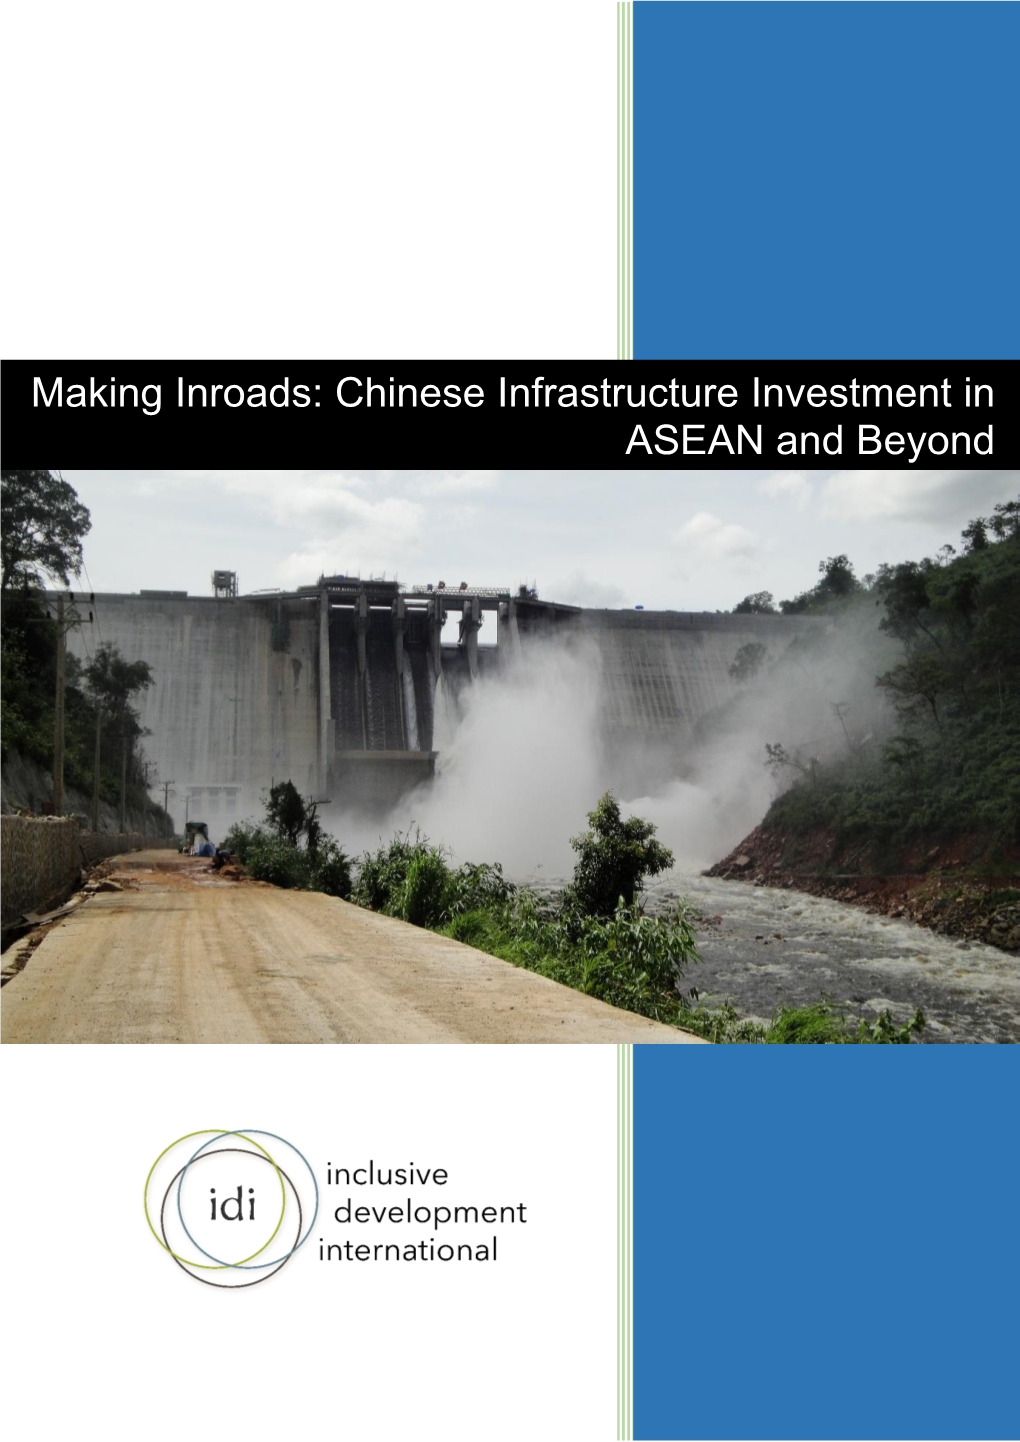 Making Inroads: Chinese Infrastructure Investment in ASEAN and Beyond